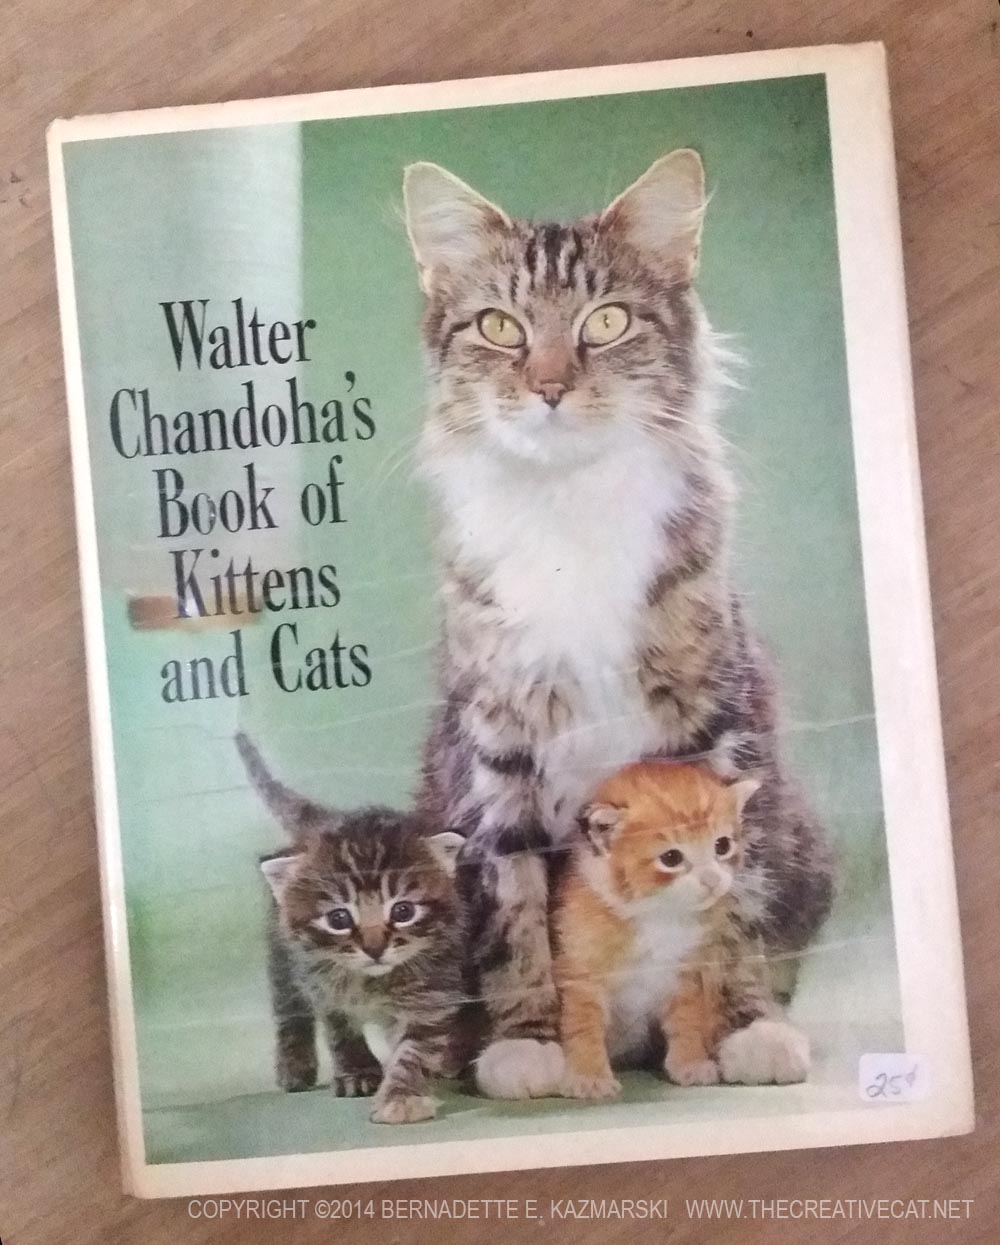 My copy of "Walter Chandoha's Book of Kittens and Cats"